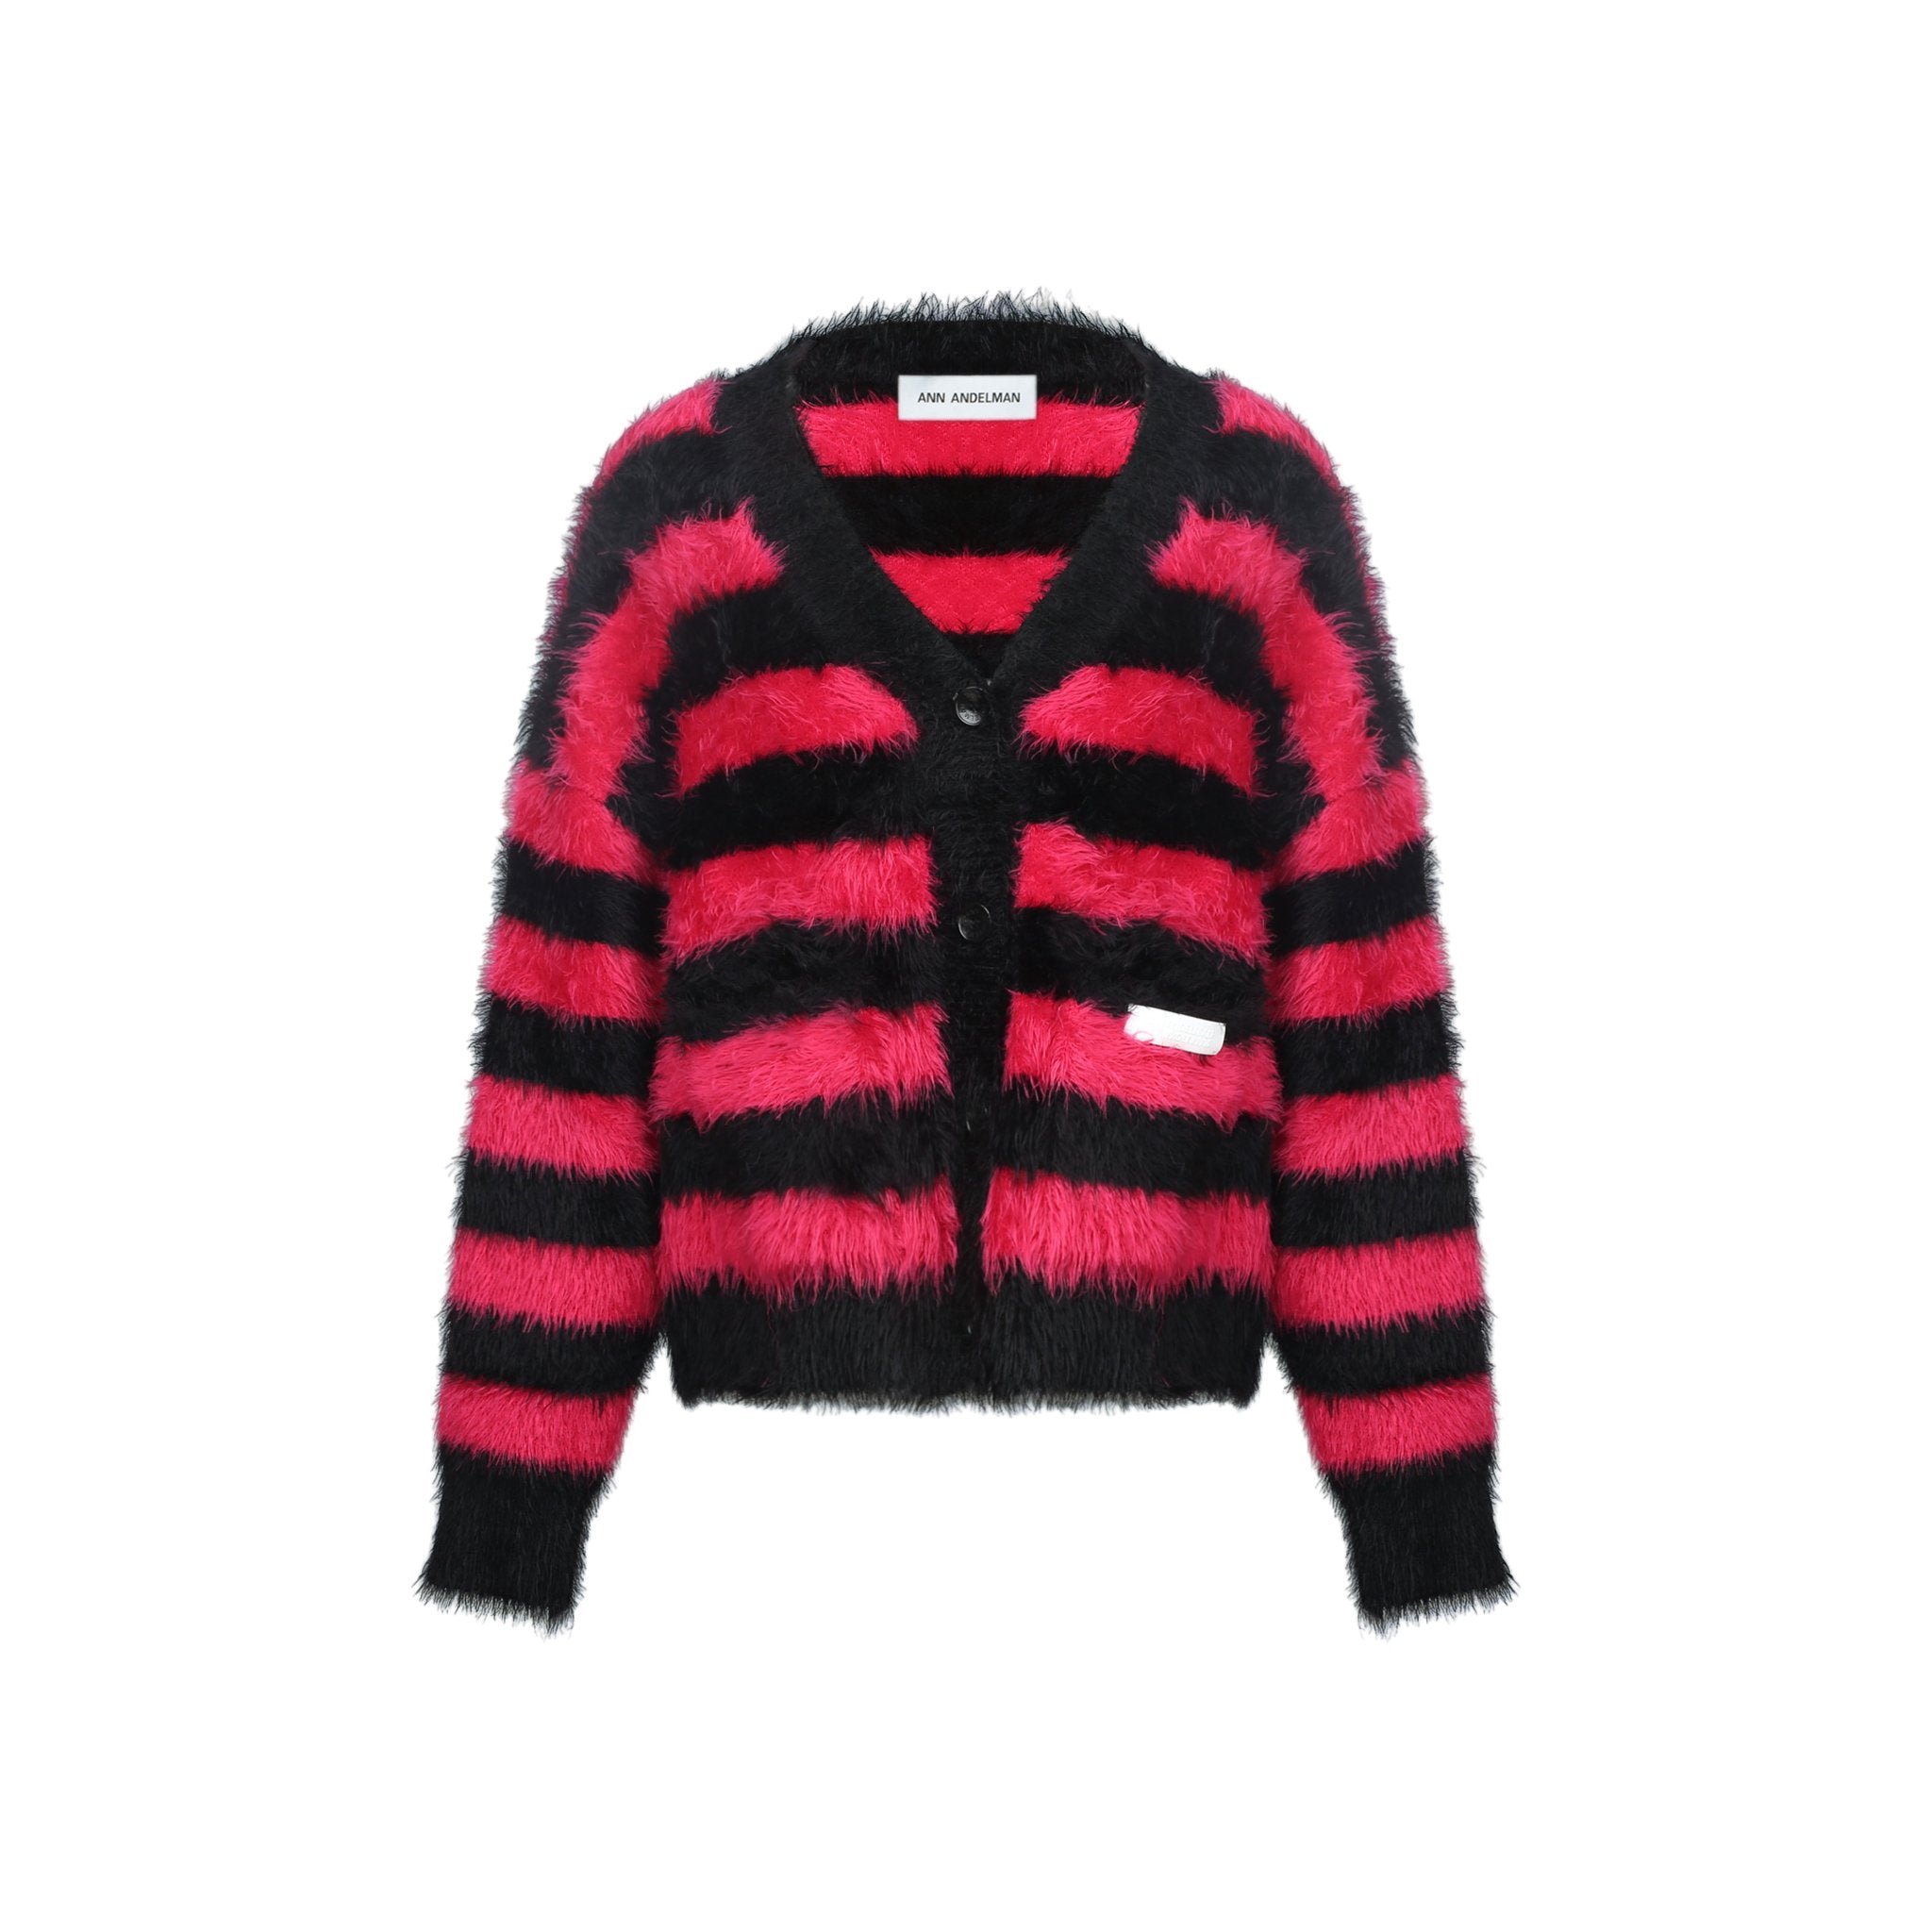 ANN ANDELMAN Black and Red Striped Wool Cardigan | MADA IN CHINA